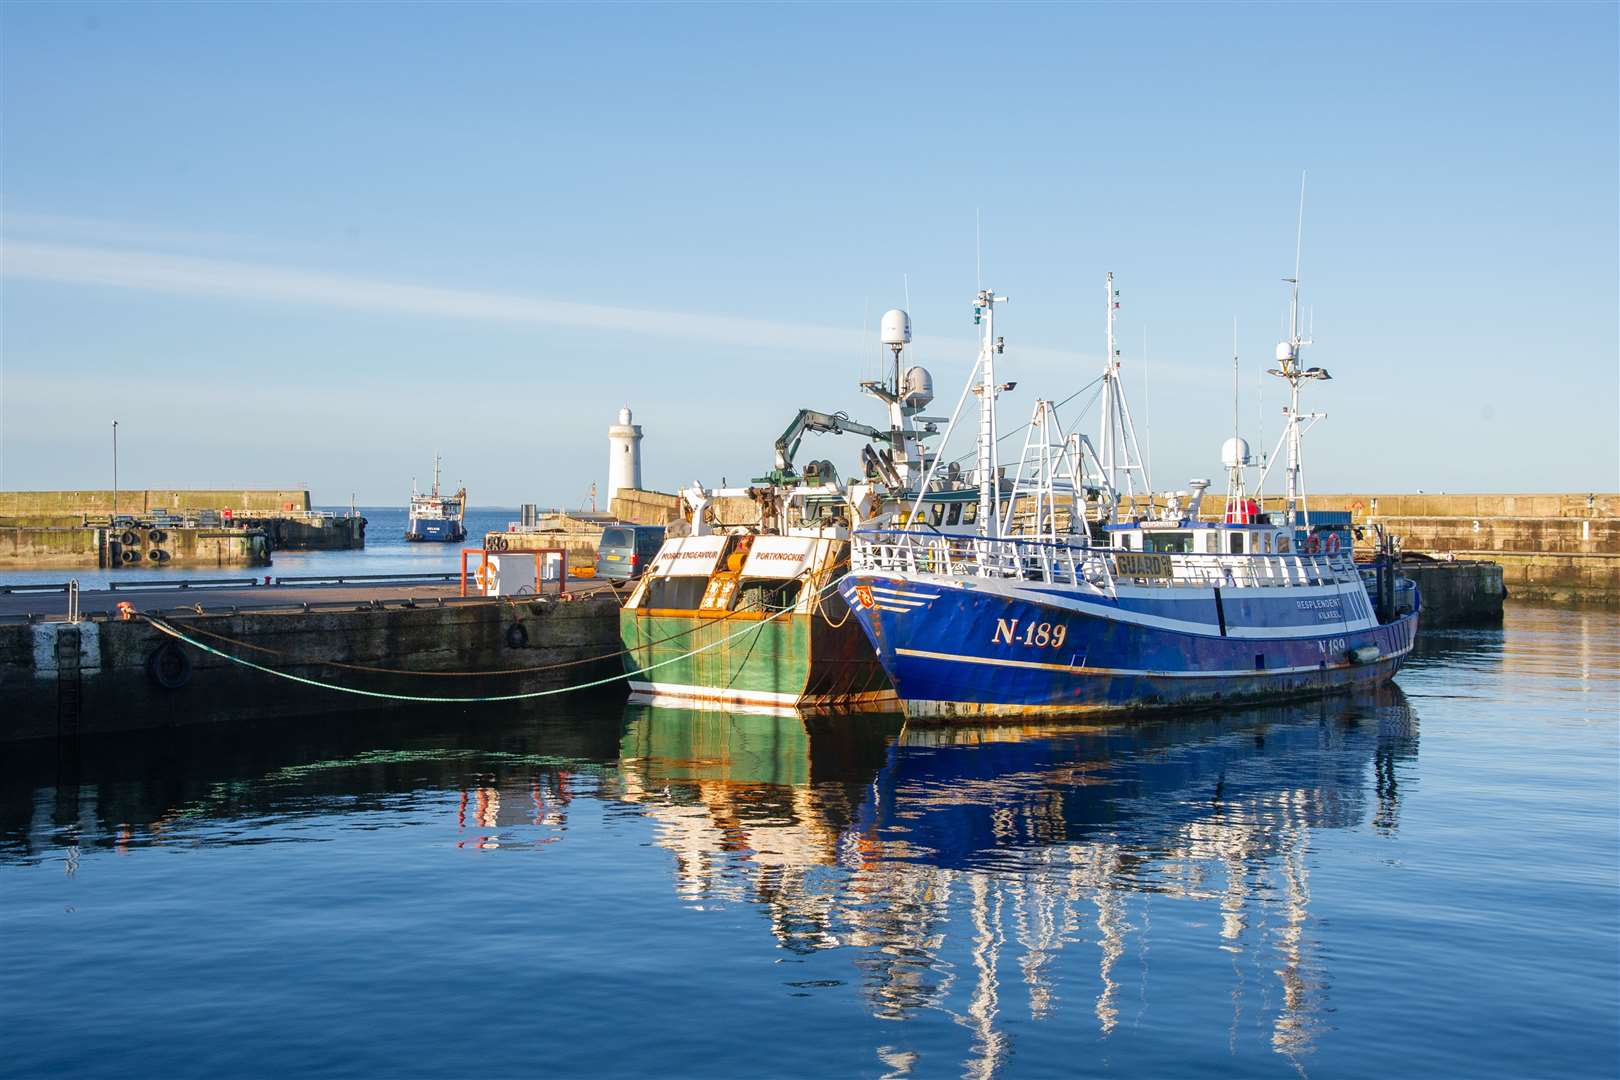 It was a slightly busier week on the fish landings front at Buckie Harbour.